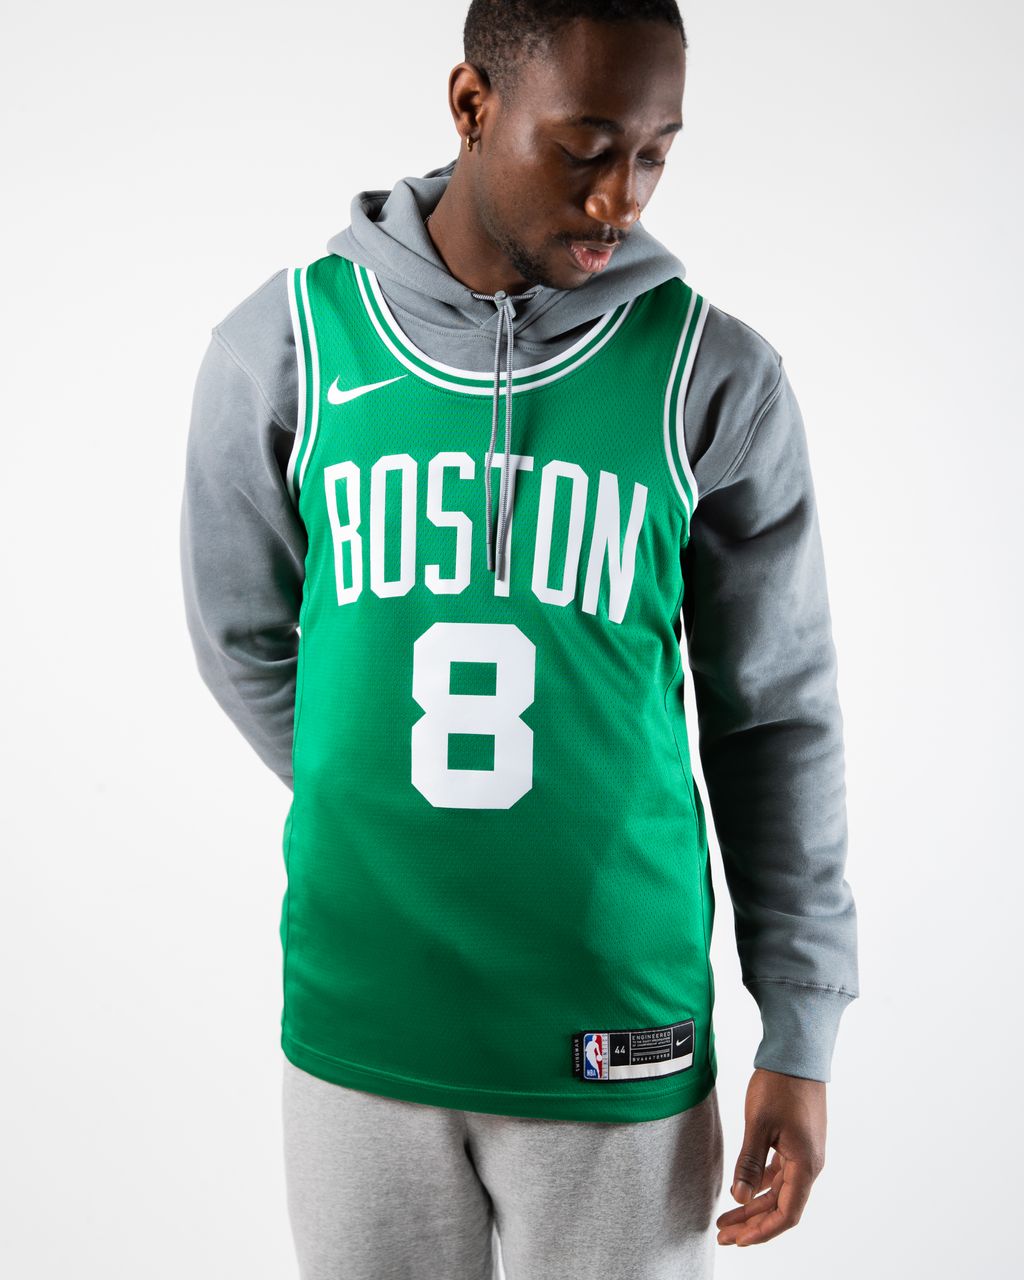 jersey over hoodie style